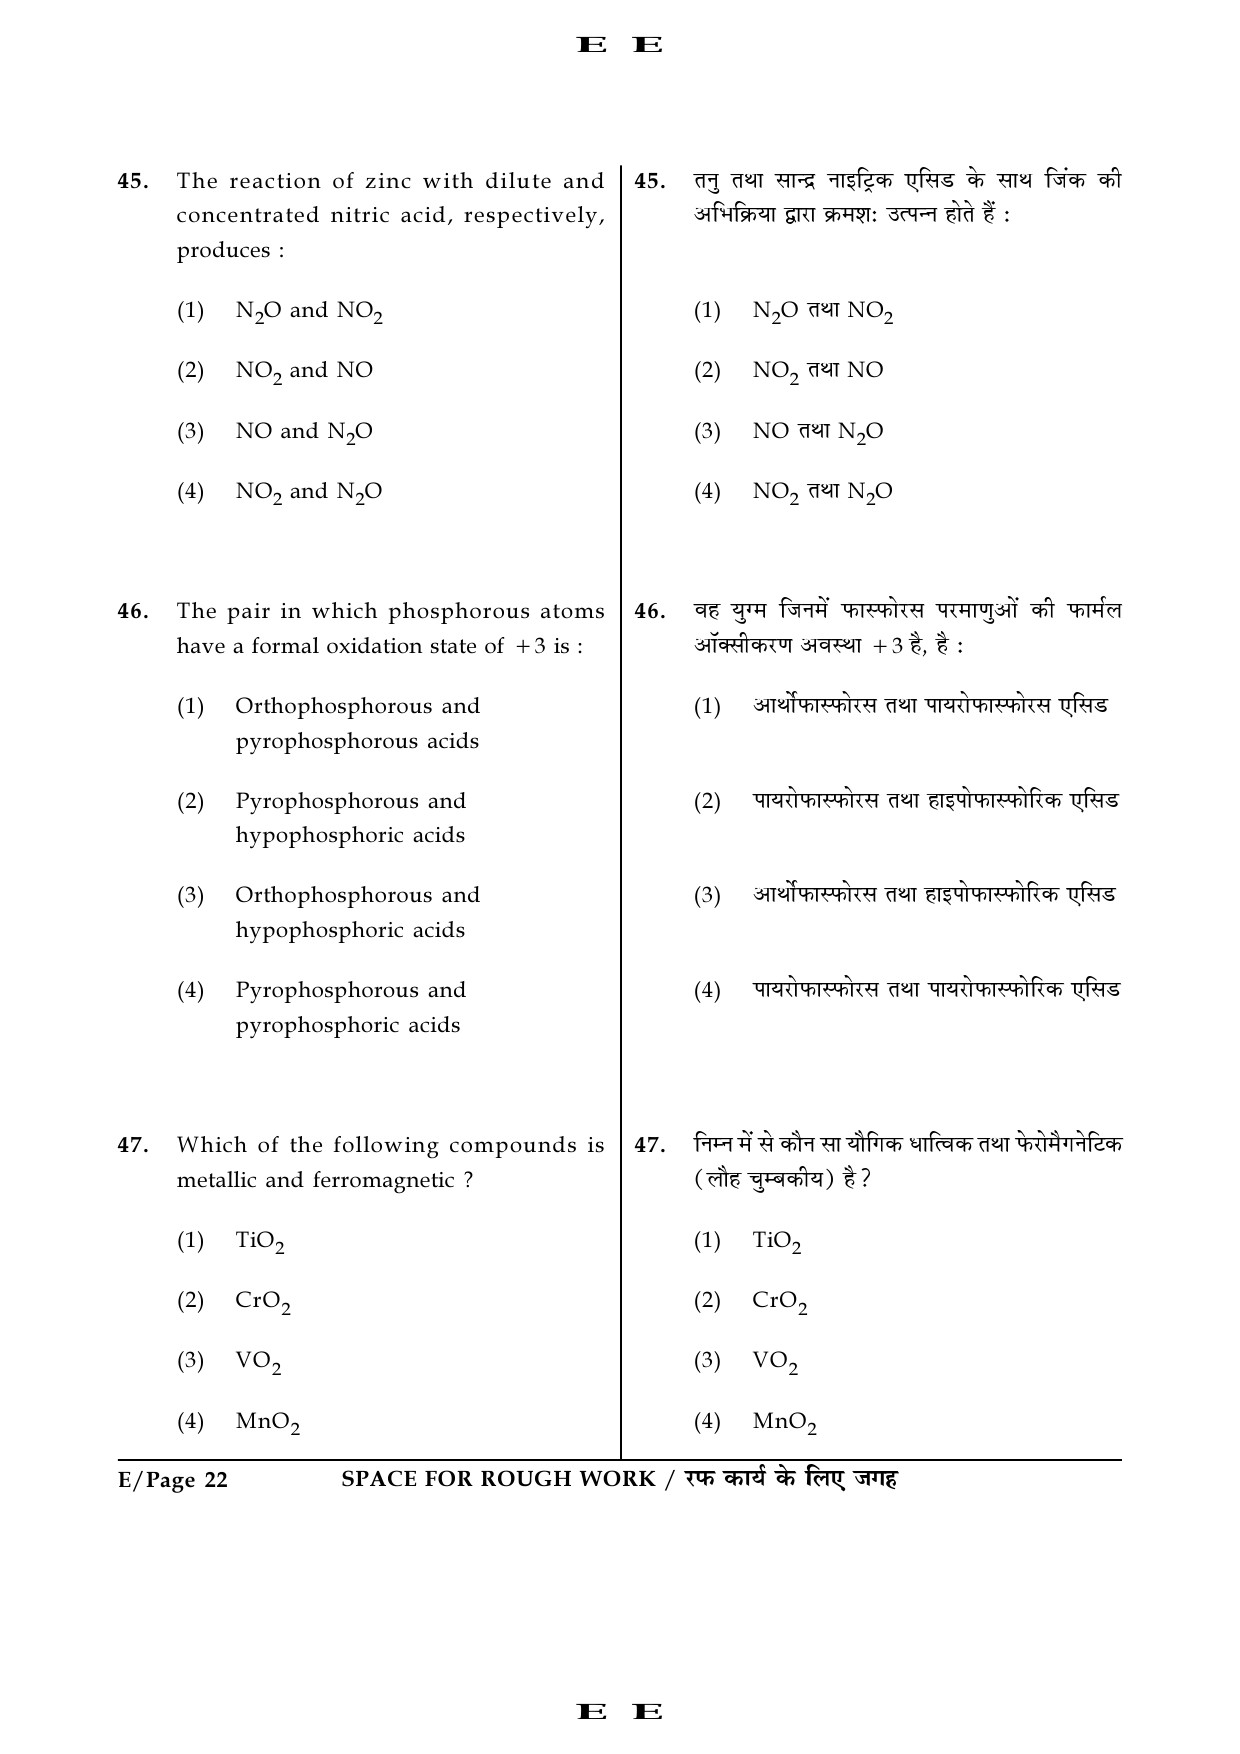 JEE Main Exam Question Paper 2016 Booklet E 22